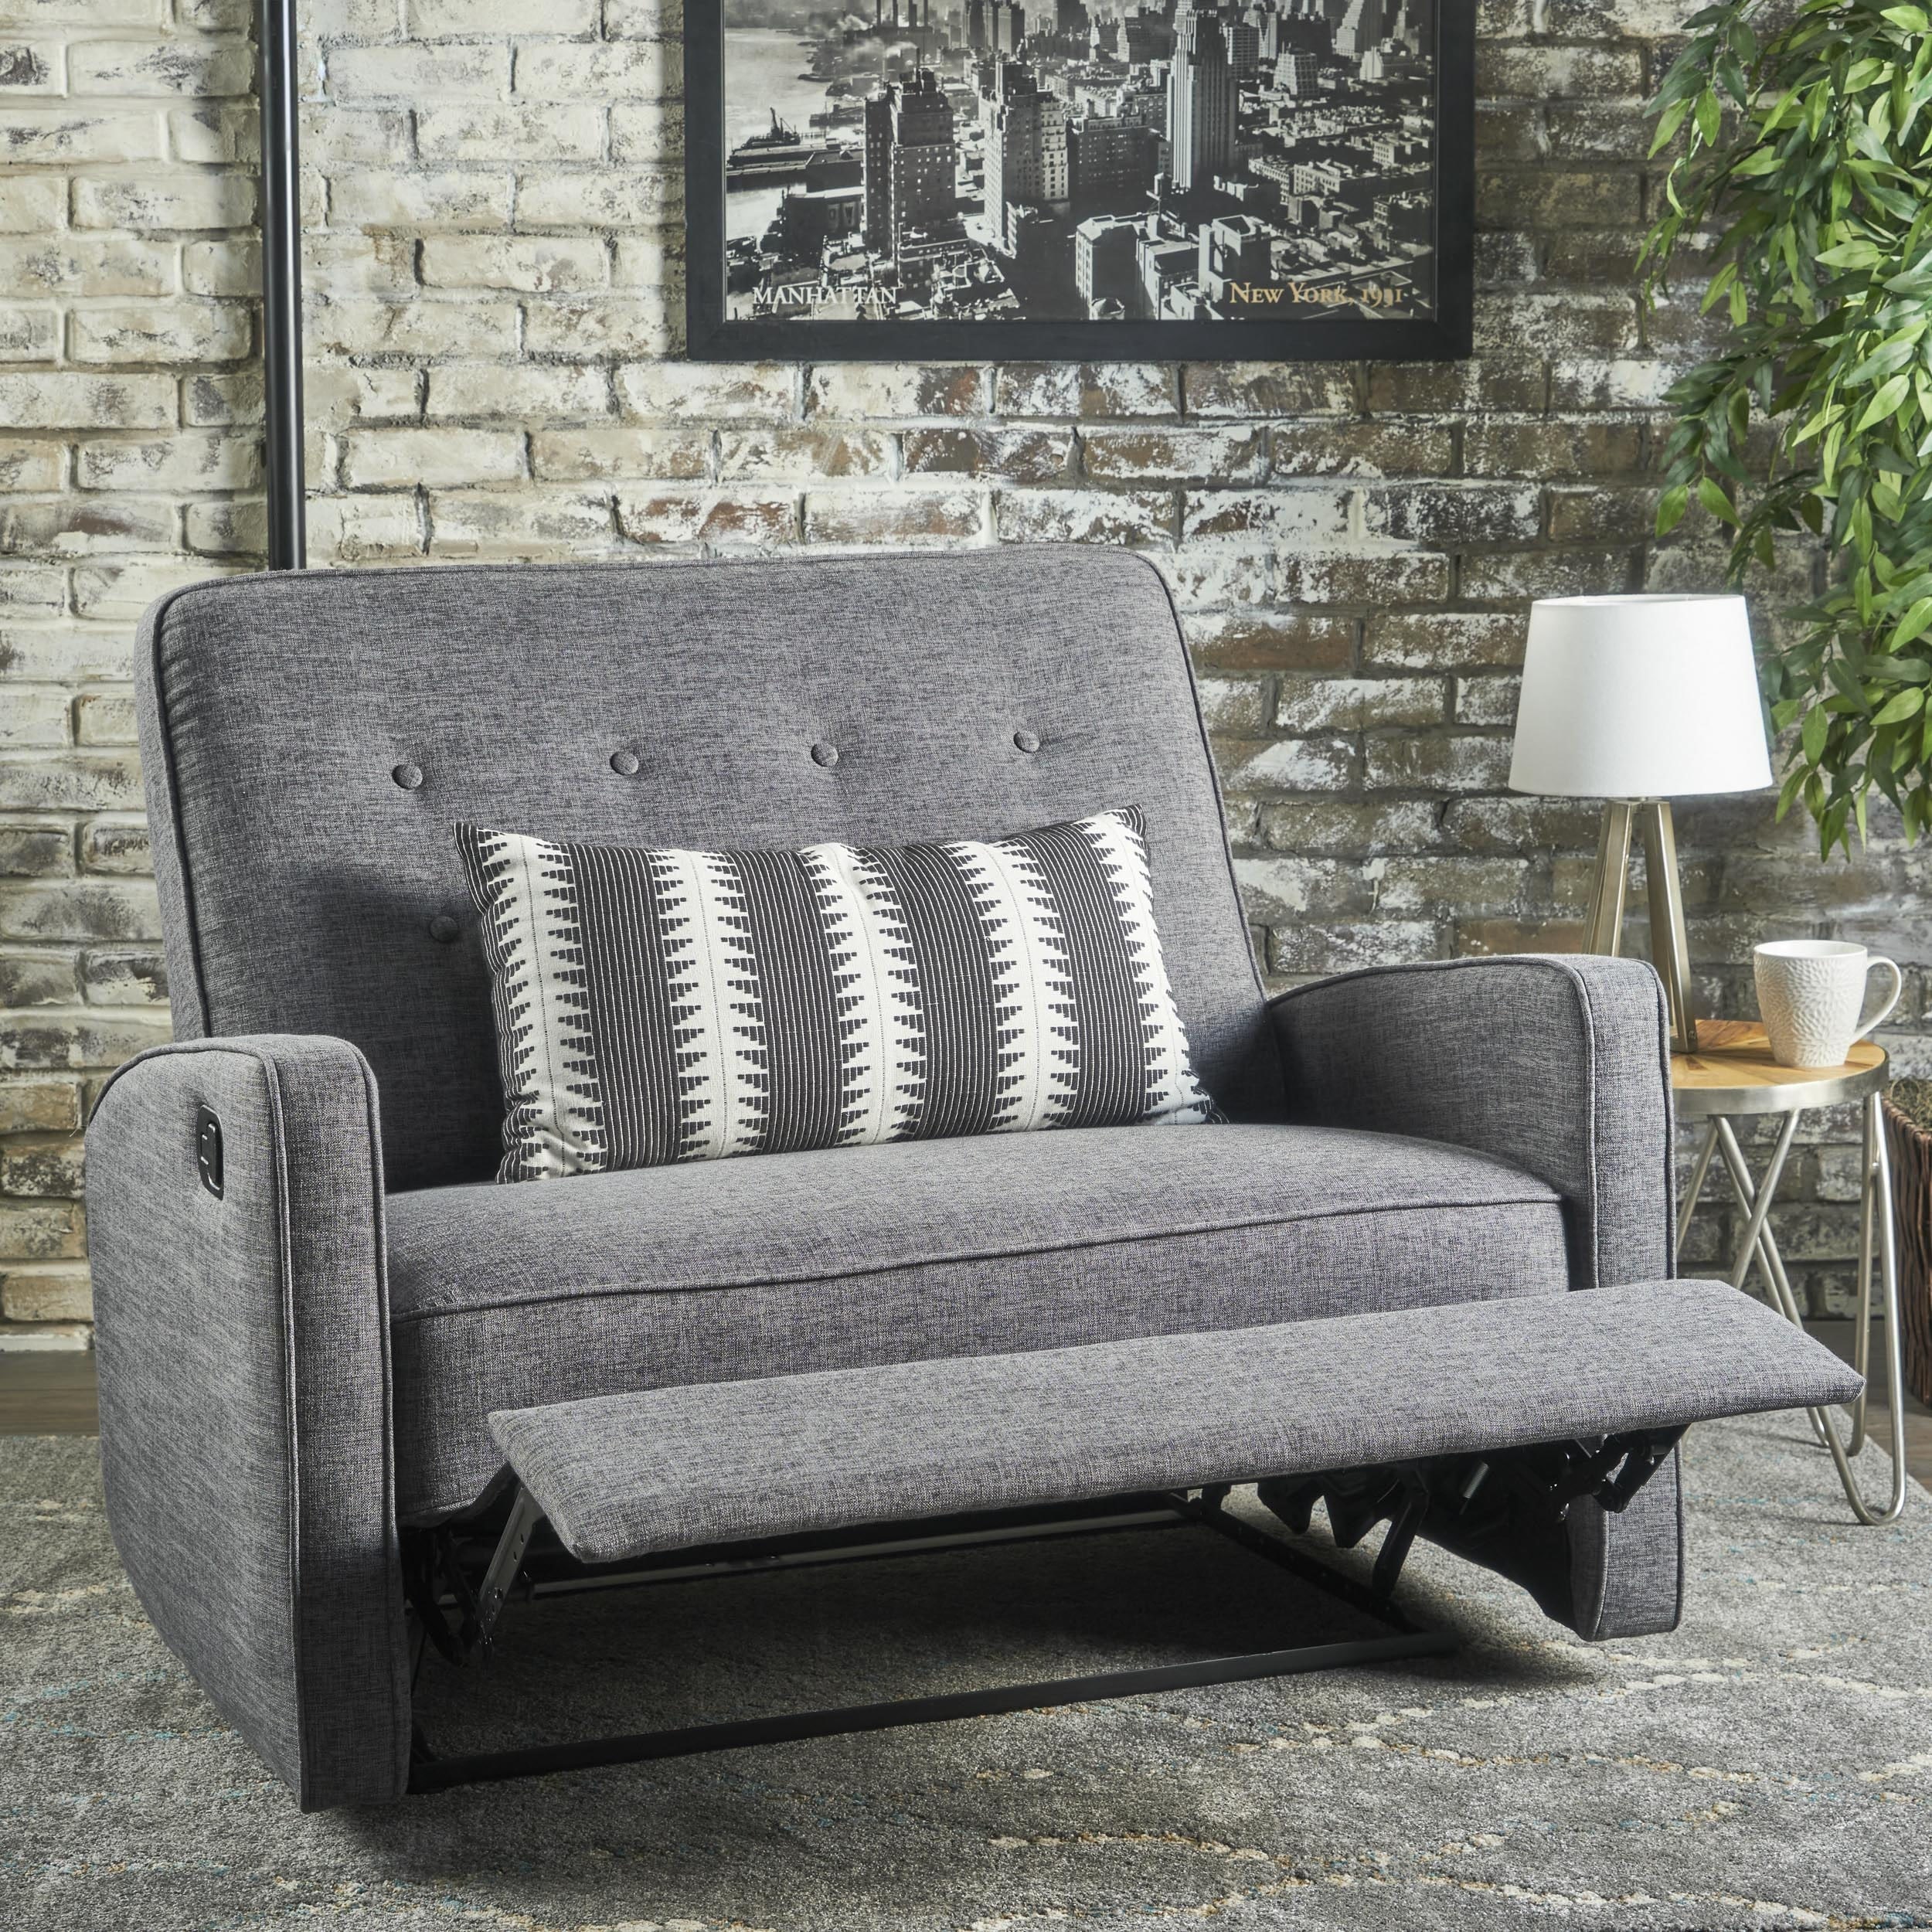 Calliope Fabric Oversized Recliner Chair By Christopher Knight Home On Sale Overstock 17362041